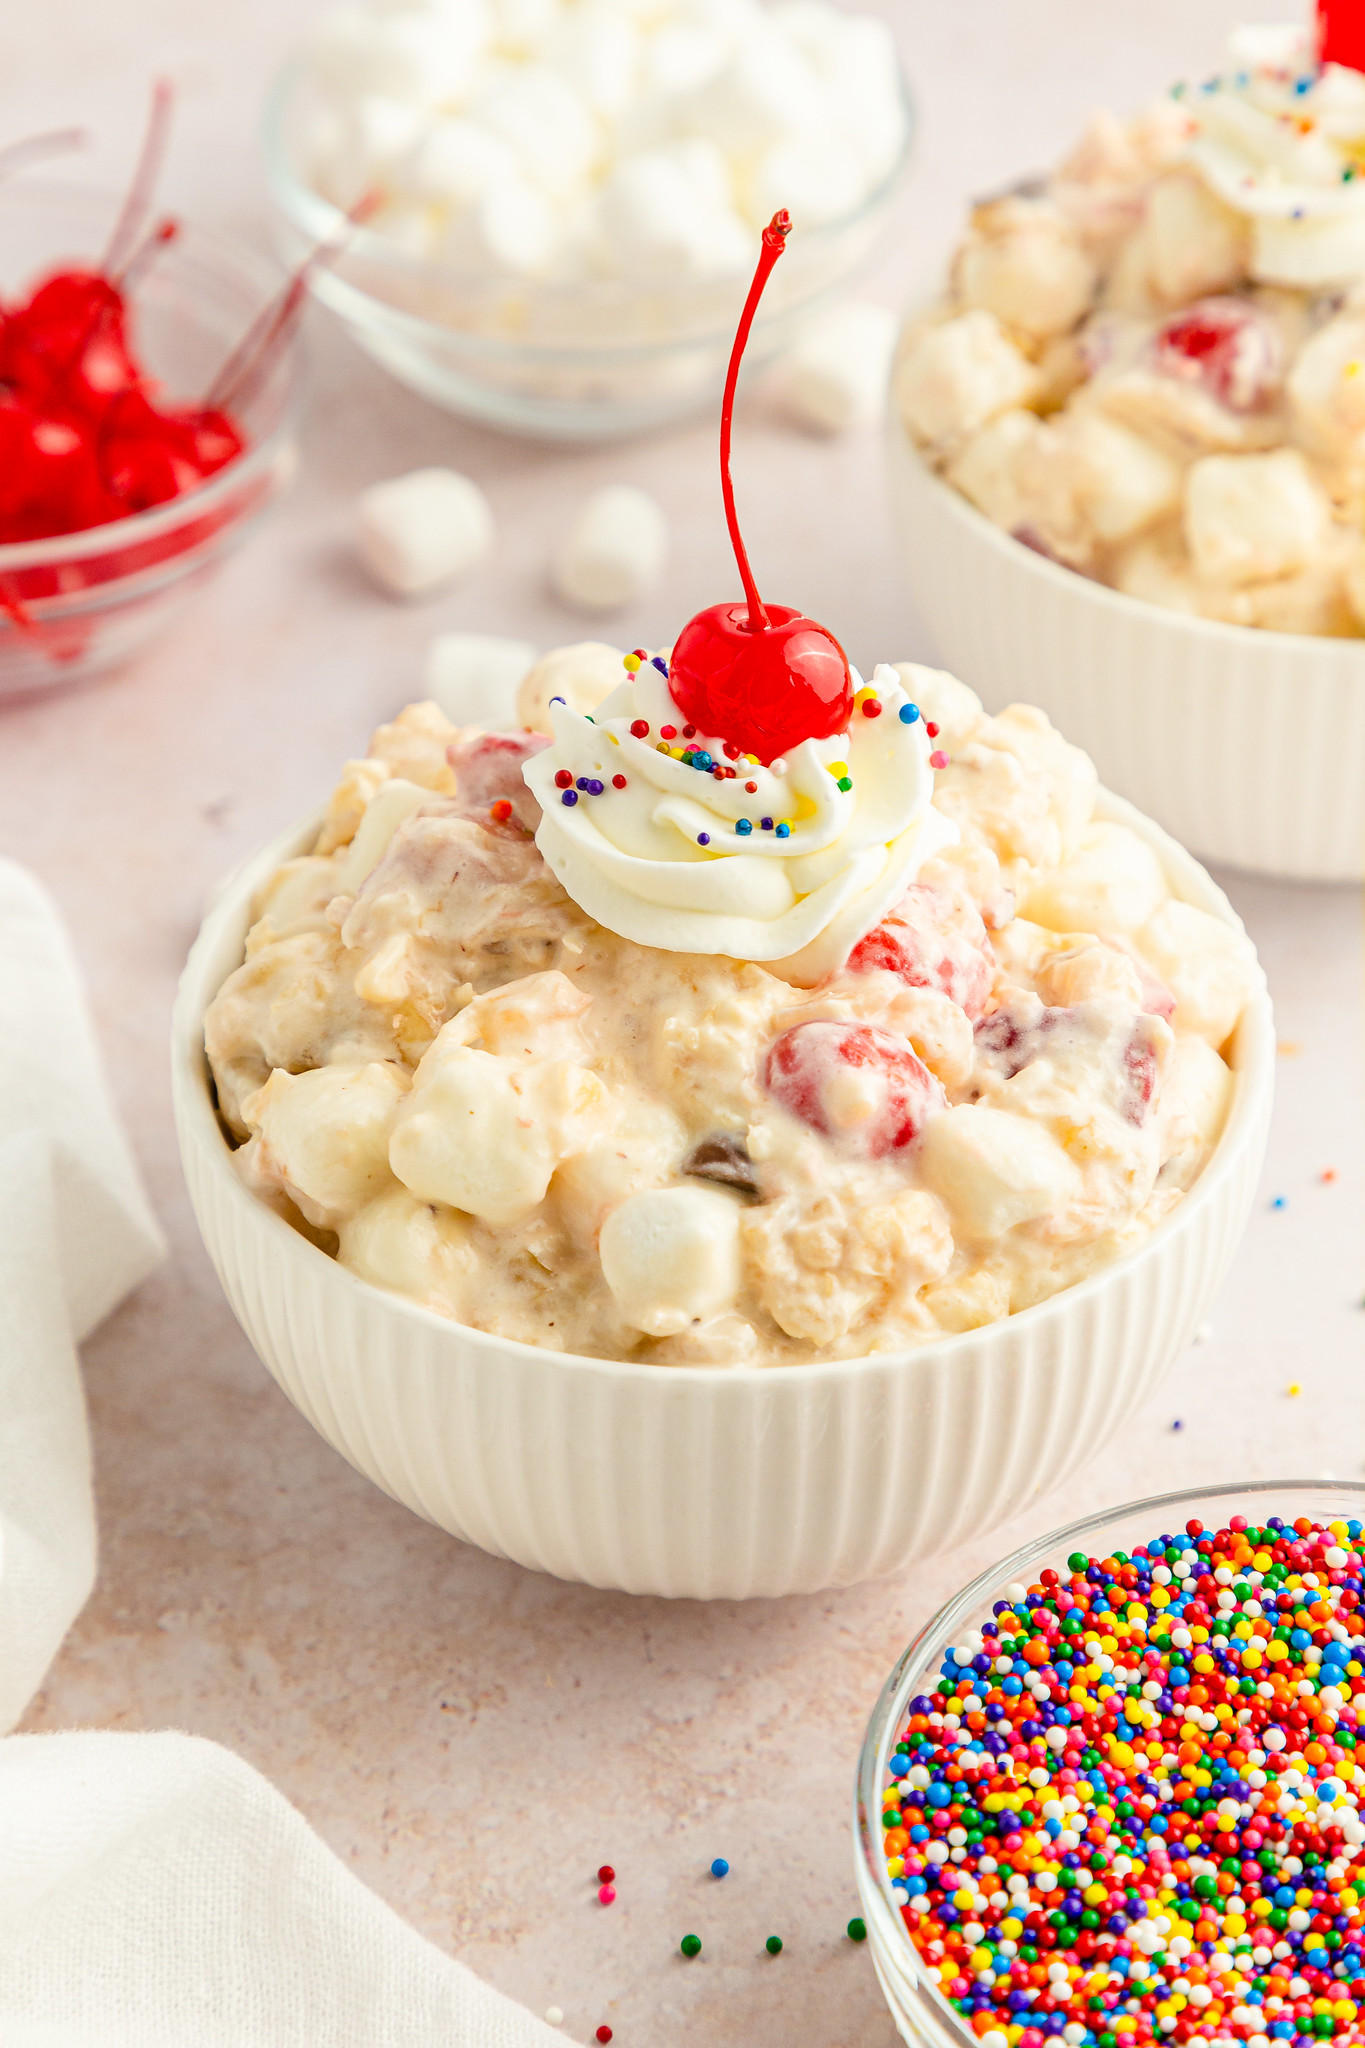 Banana Split Fluff is a delicious and indulgent dessert that combines the classic flavors of banana split with the light and fluffy texture of marshmallows. It's the perfect no bake treat for summer! 